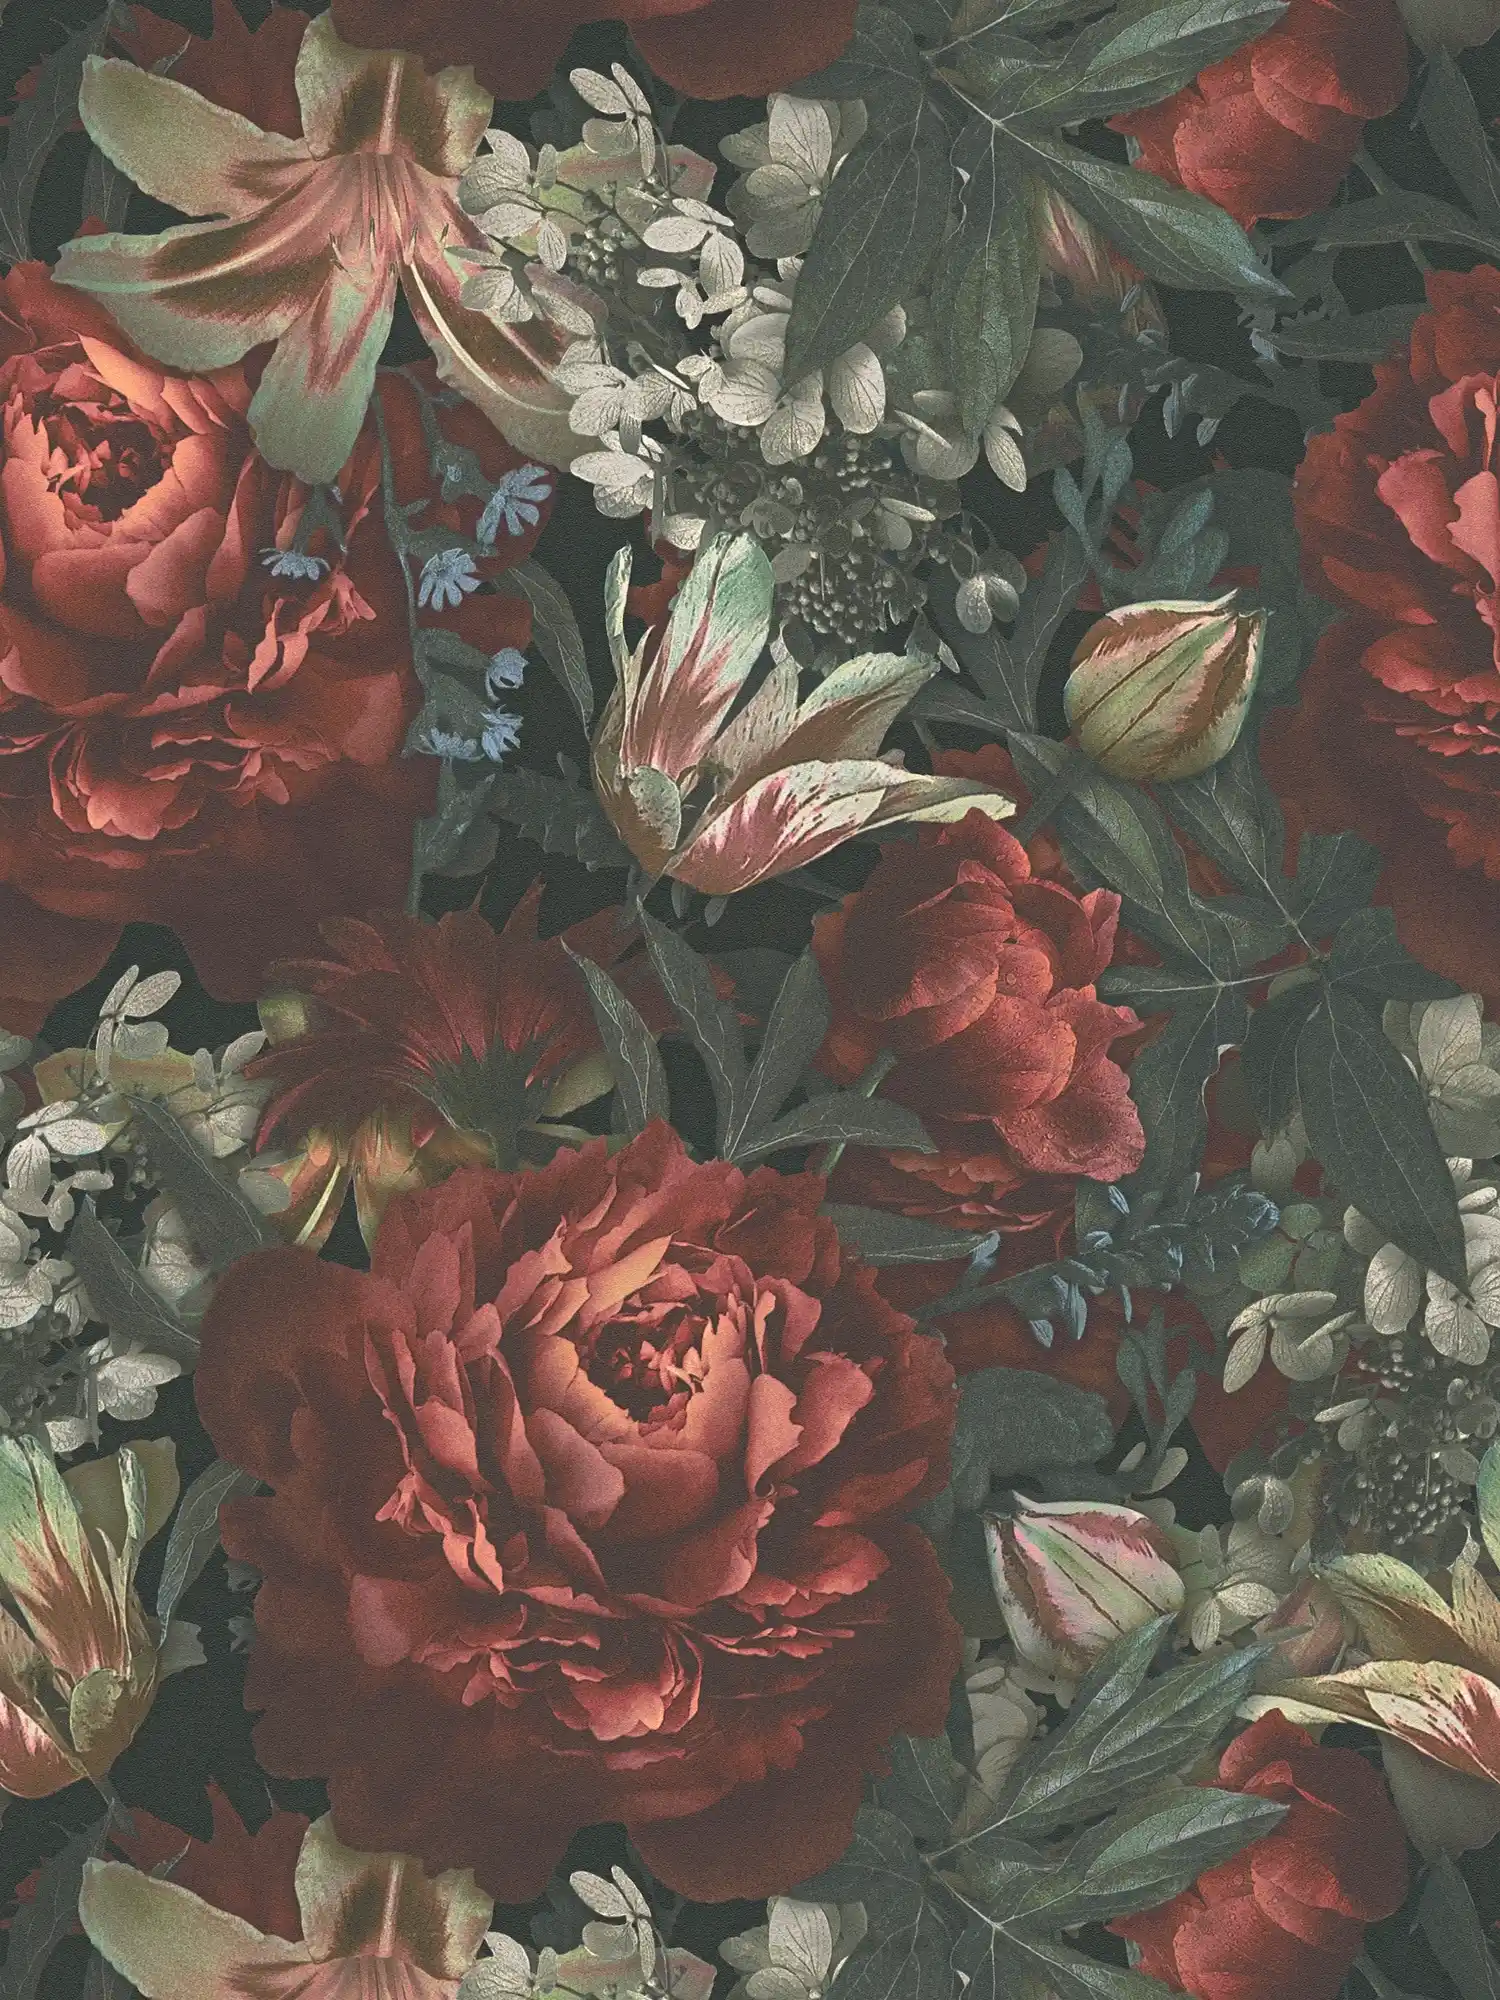 Floral wallpaper roses & tulips vintage style - green, red, cream
